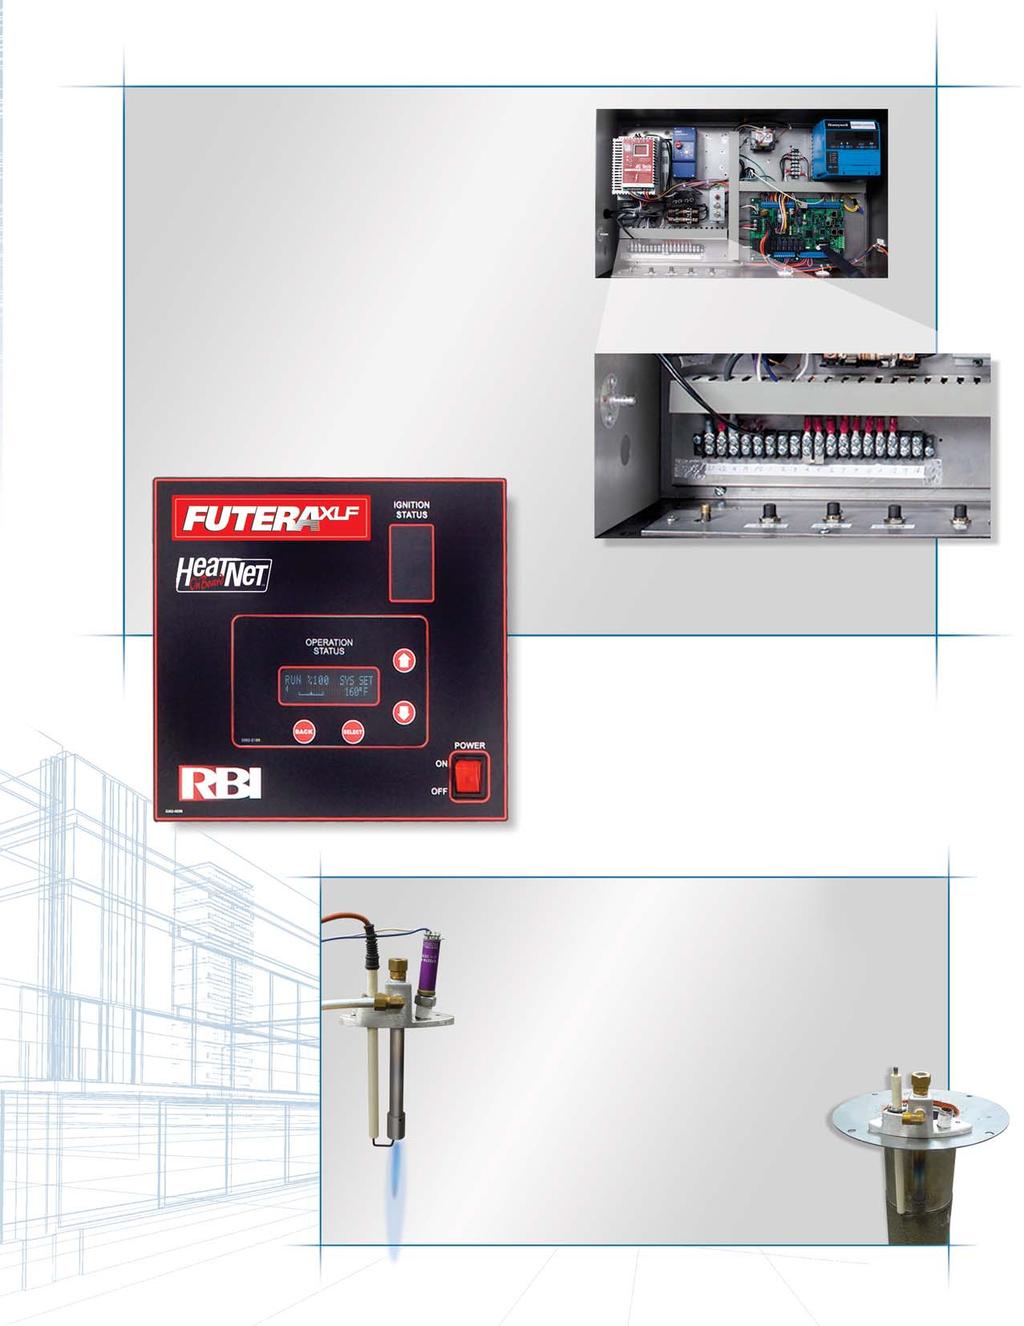 Smart Controls, Simplified Diagnostics The Futera XLF comes standard with HeatNet on board, ready on installation for a variety of configurations: stand-alone, part of a Master/Member network using